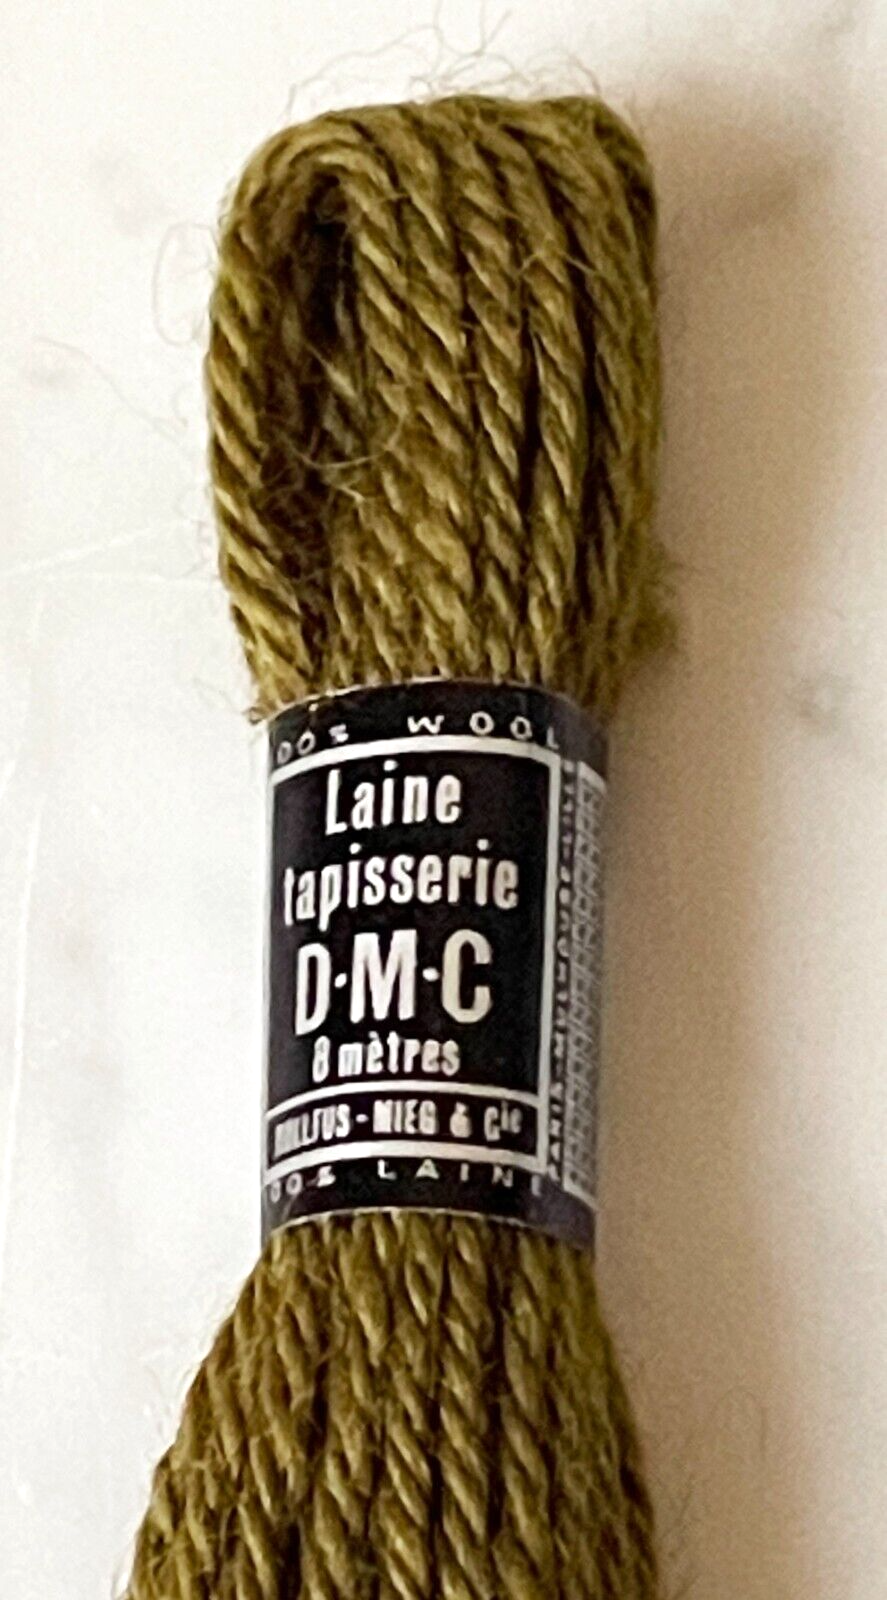 Primary image for DMC Laine Tapisserie France 100% Wool Tapestry Yarn - 1 Skein Olive Green #7355